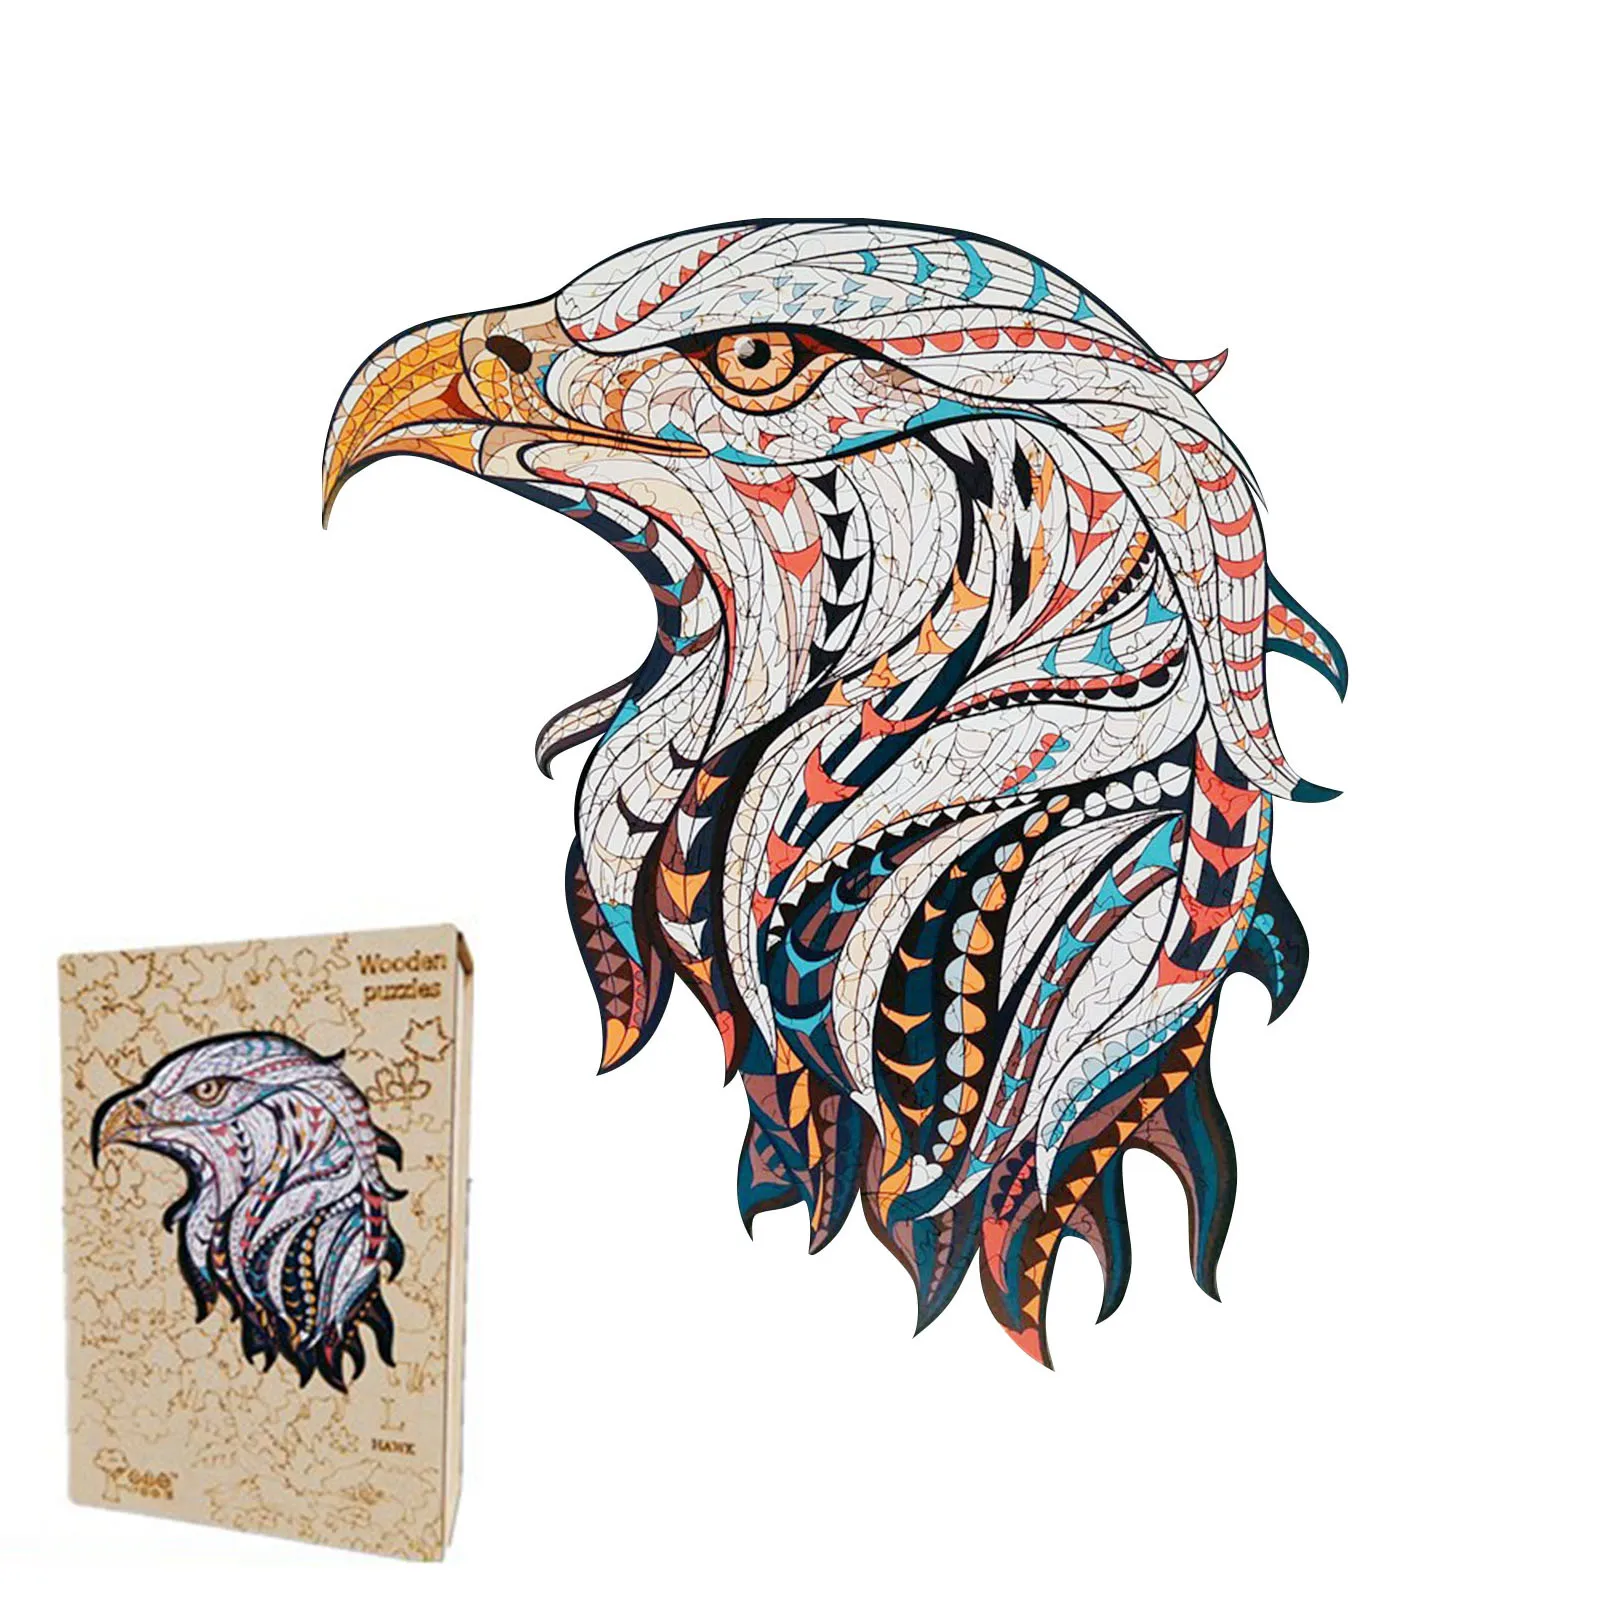 

Wooden Jigsaw Puzzles for Adults Unique Eagle Lion Shape Jigsaw Each Piece Is Animal Shaped Children DIY Puzzle Christmas Gifts